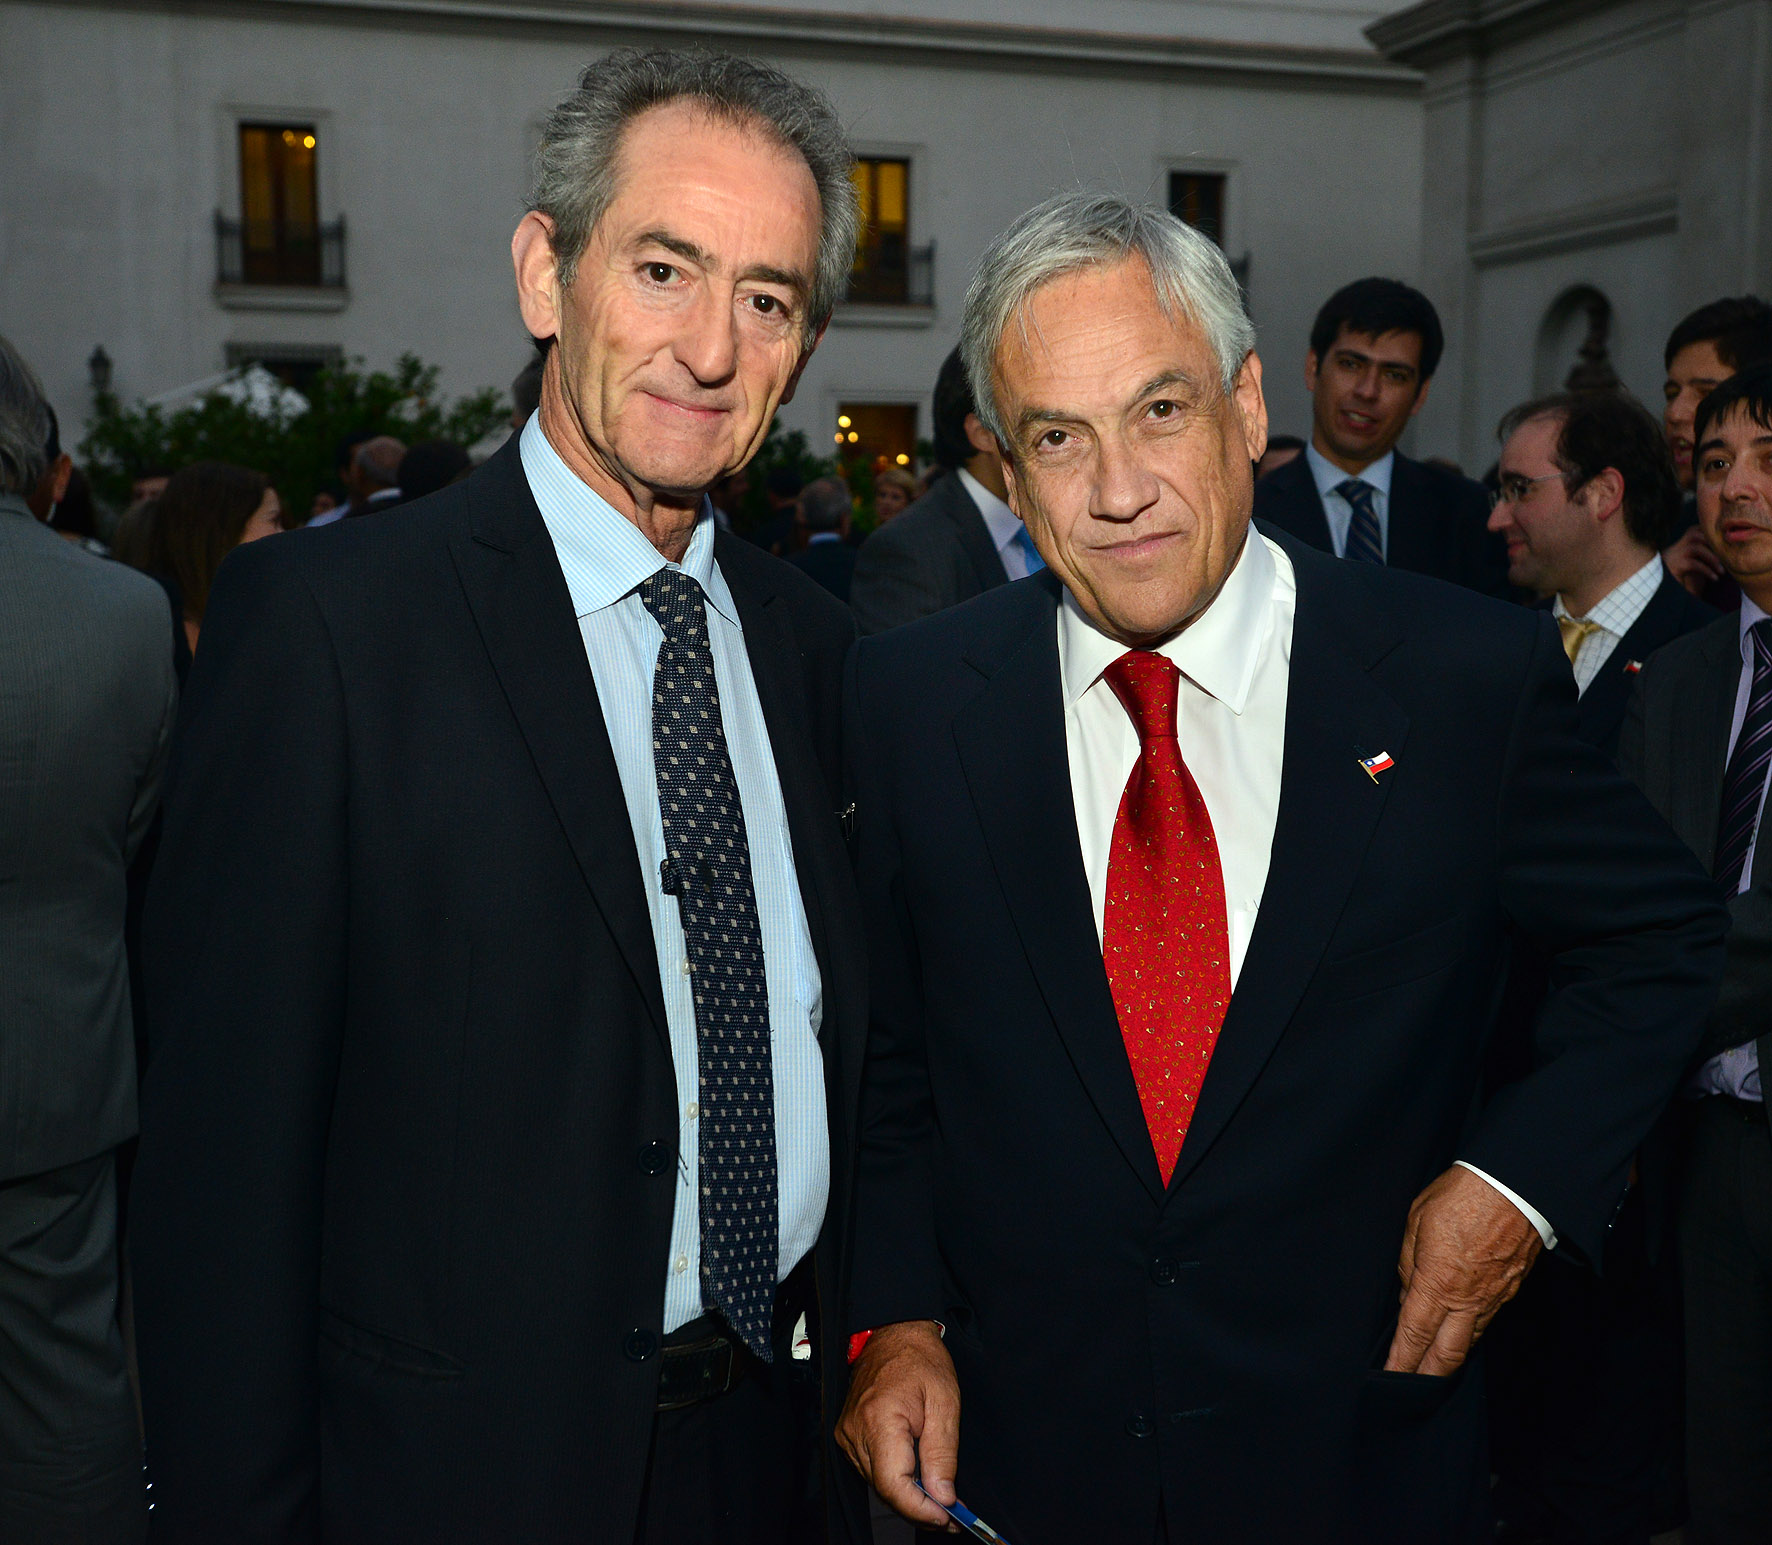 two men standing together at an event